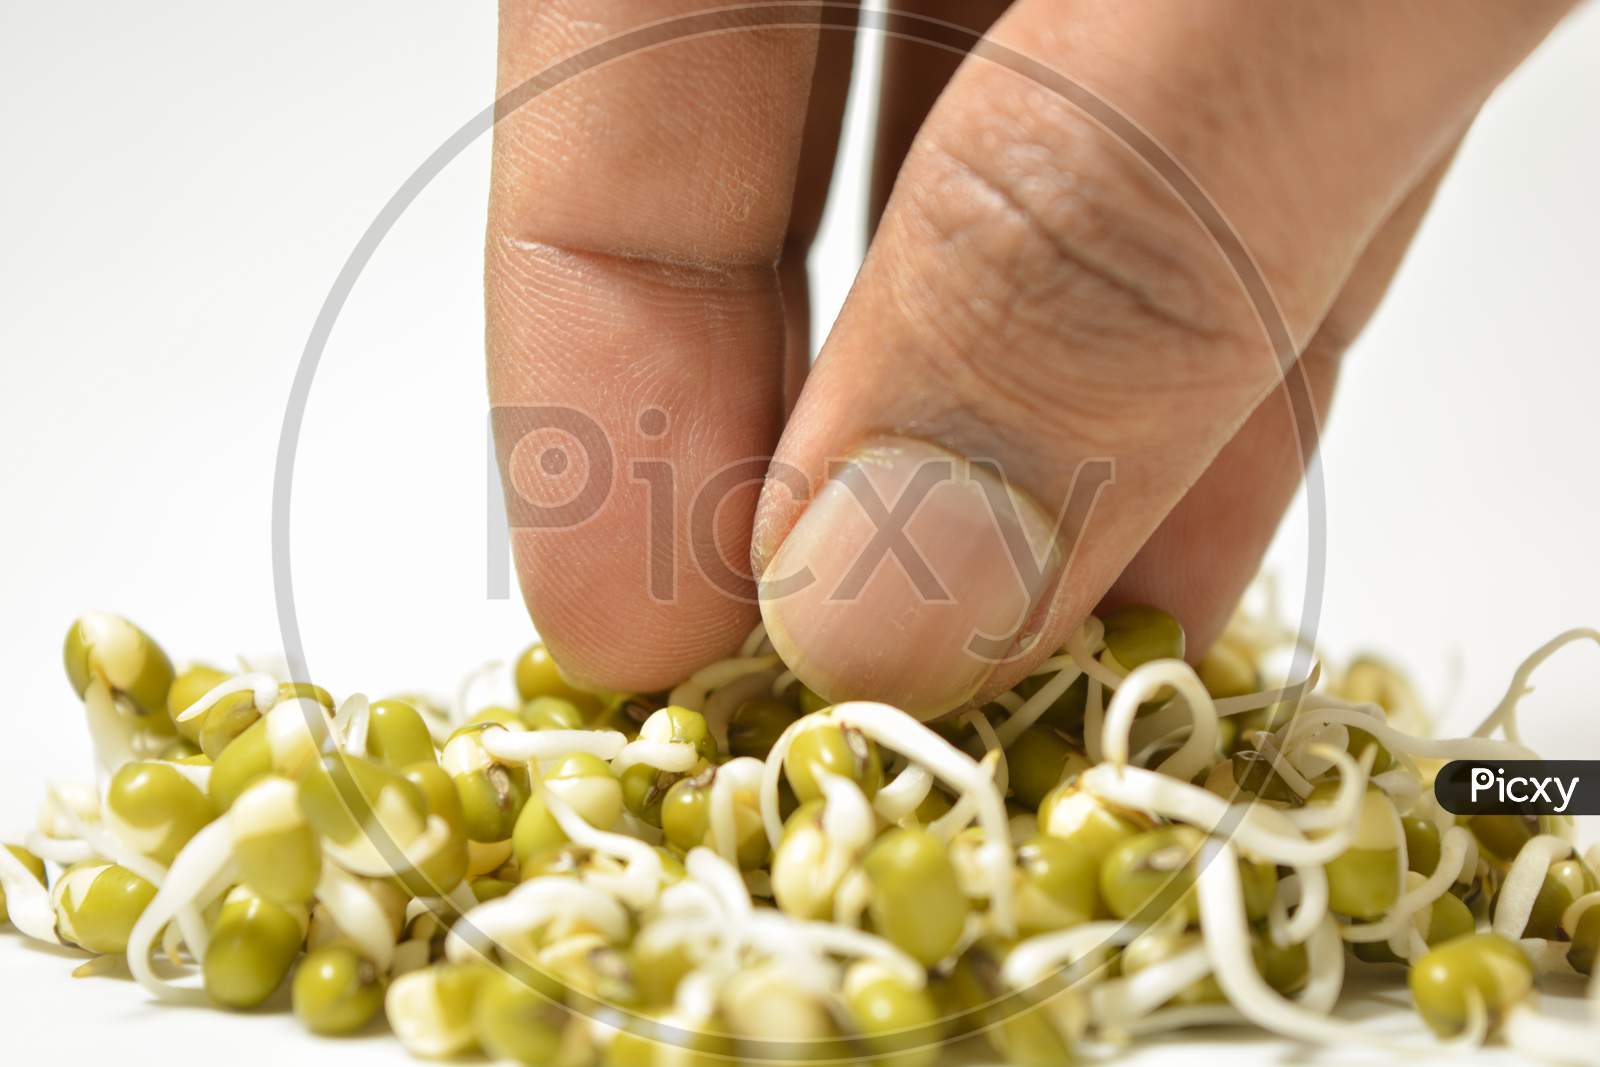 Picking Up Sprouted Green Gram Good For Health